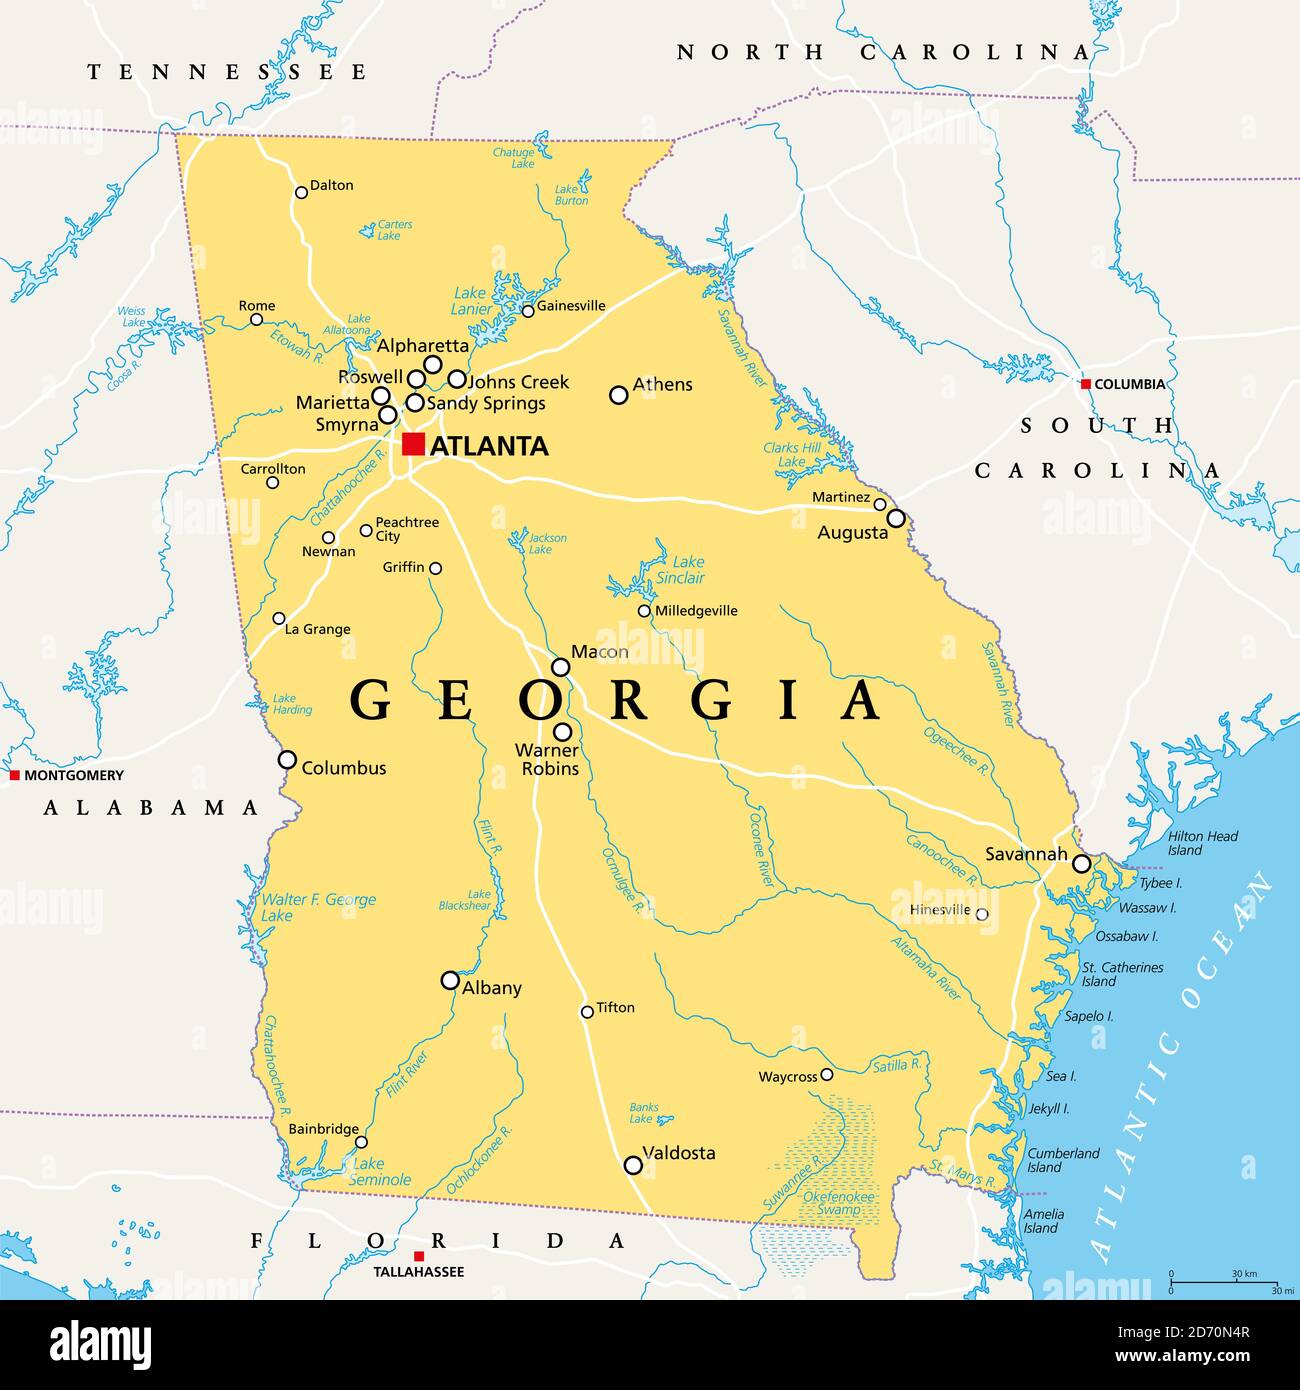 Georgia Political Map By Mapscom From Mapscom Worlds Largest Map Images ...